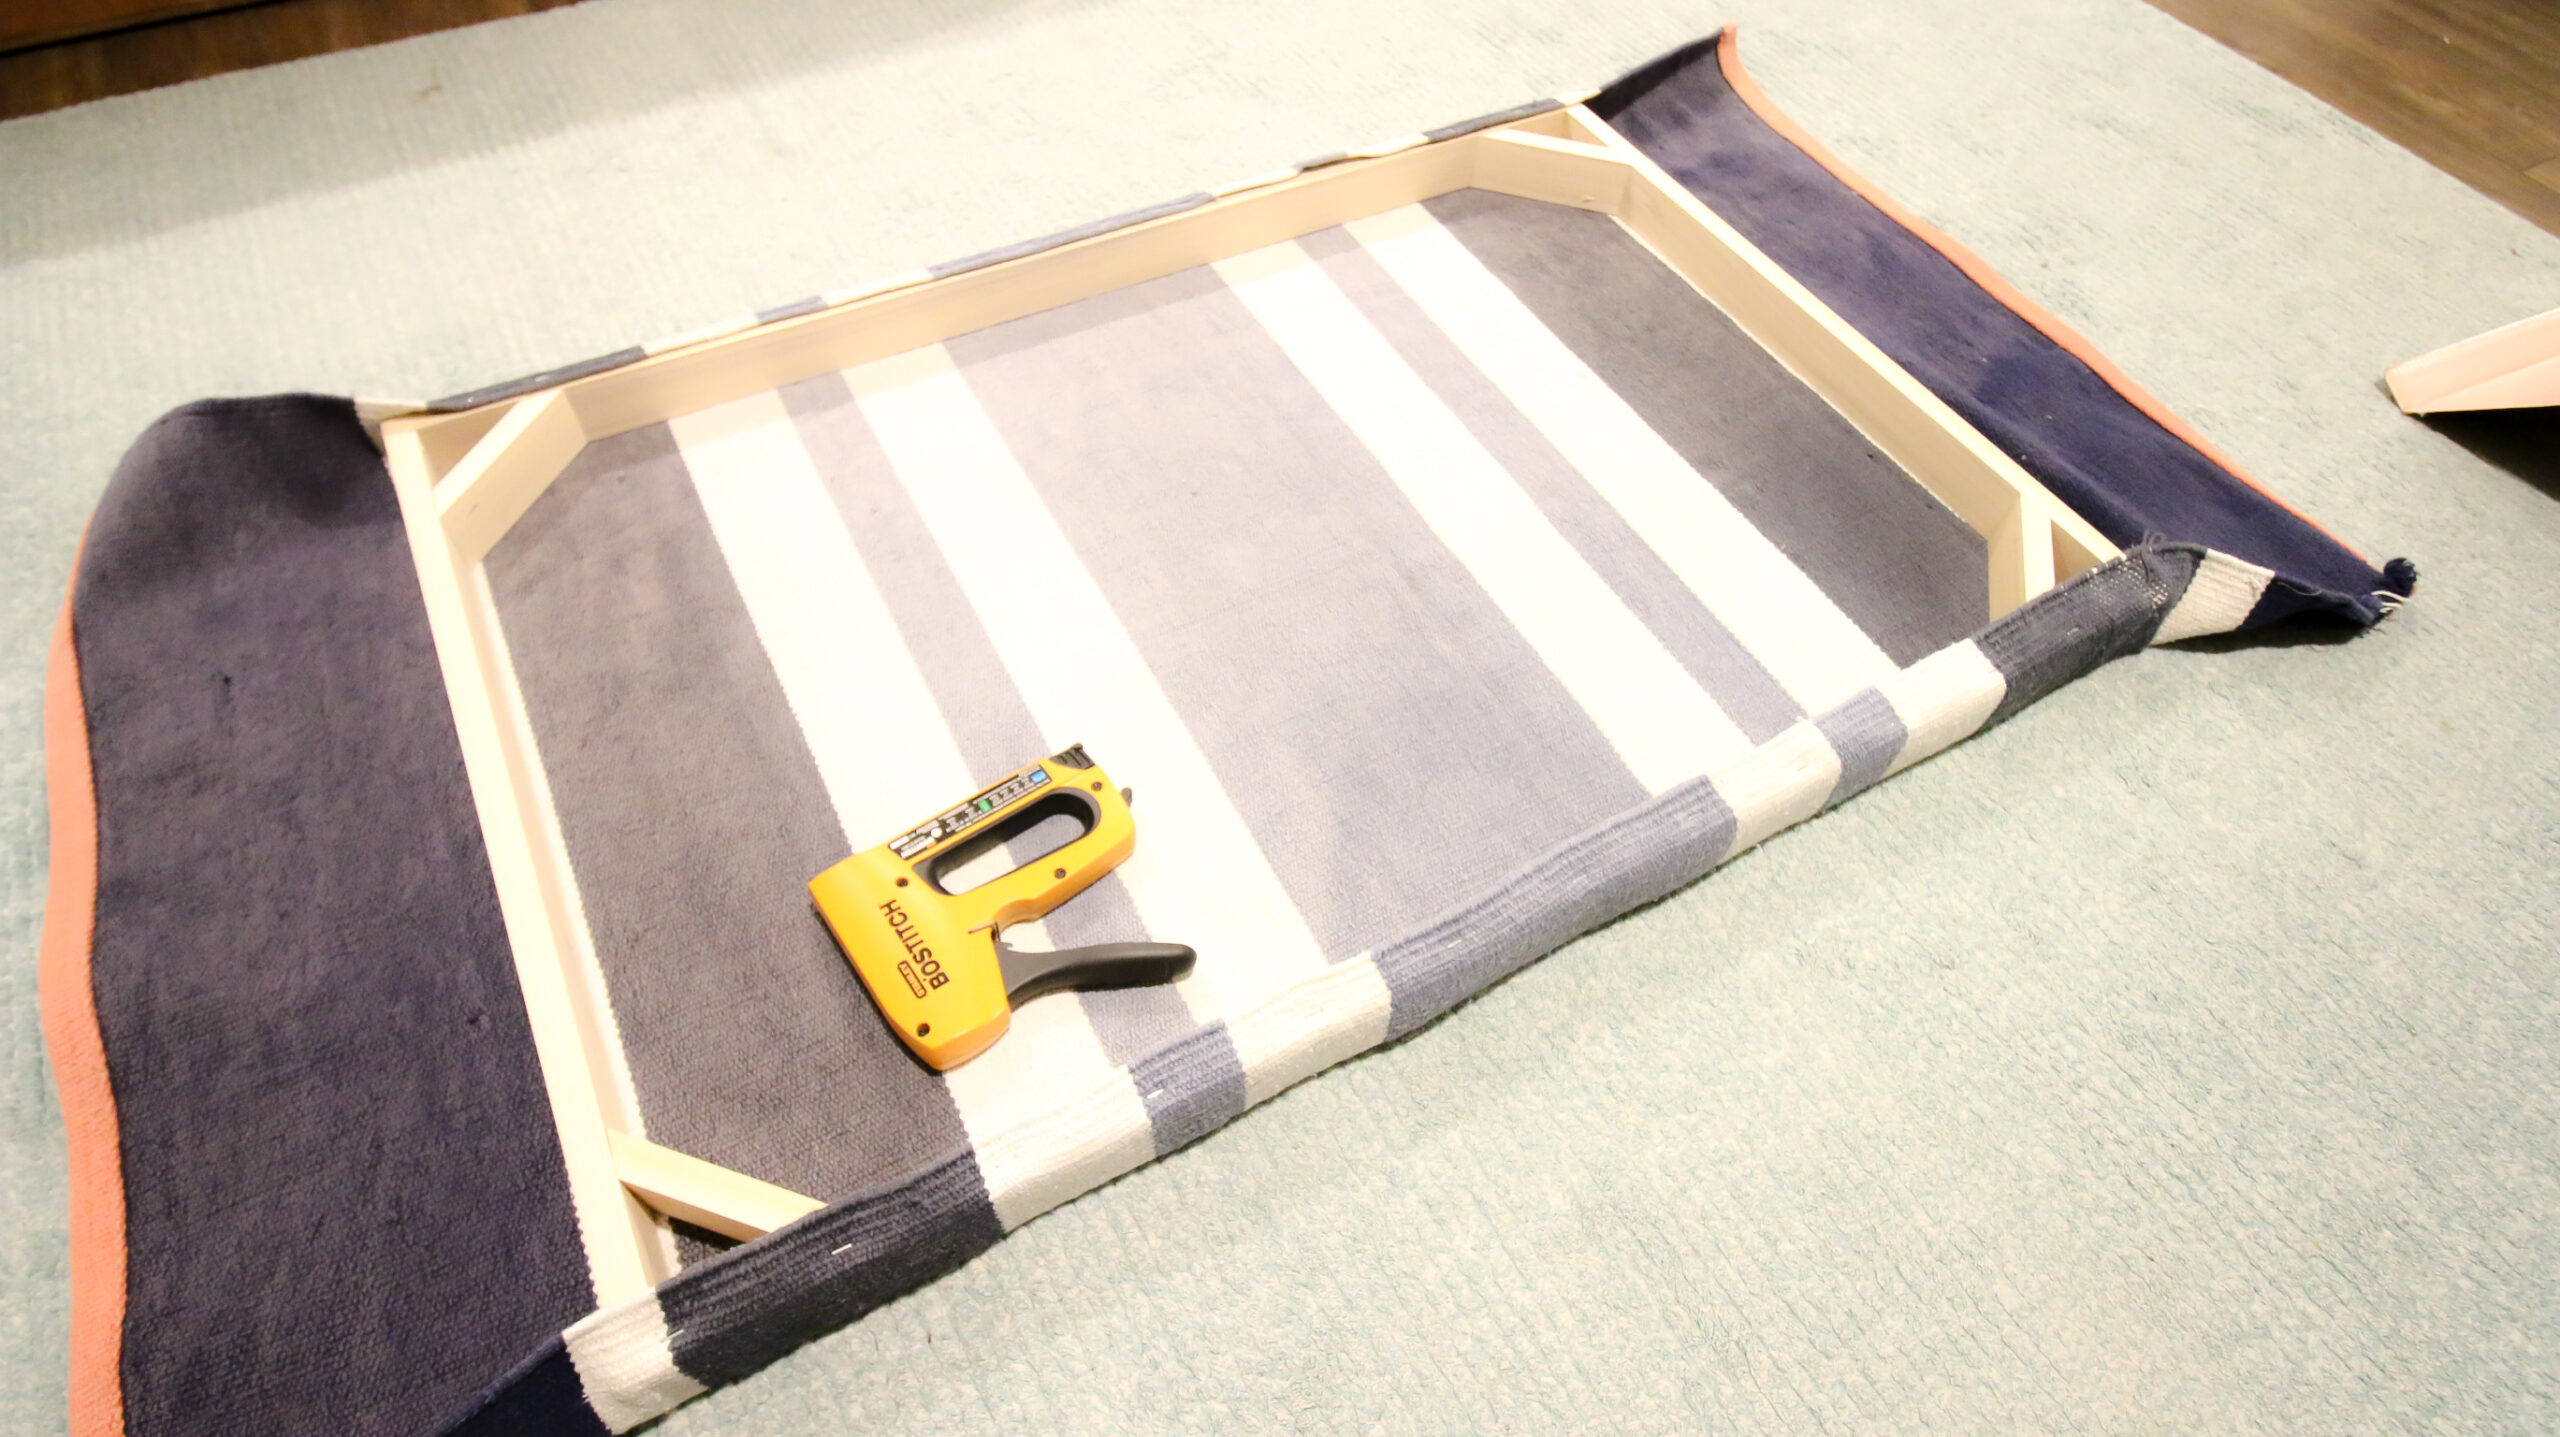 Attaching the Rug to the Frame